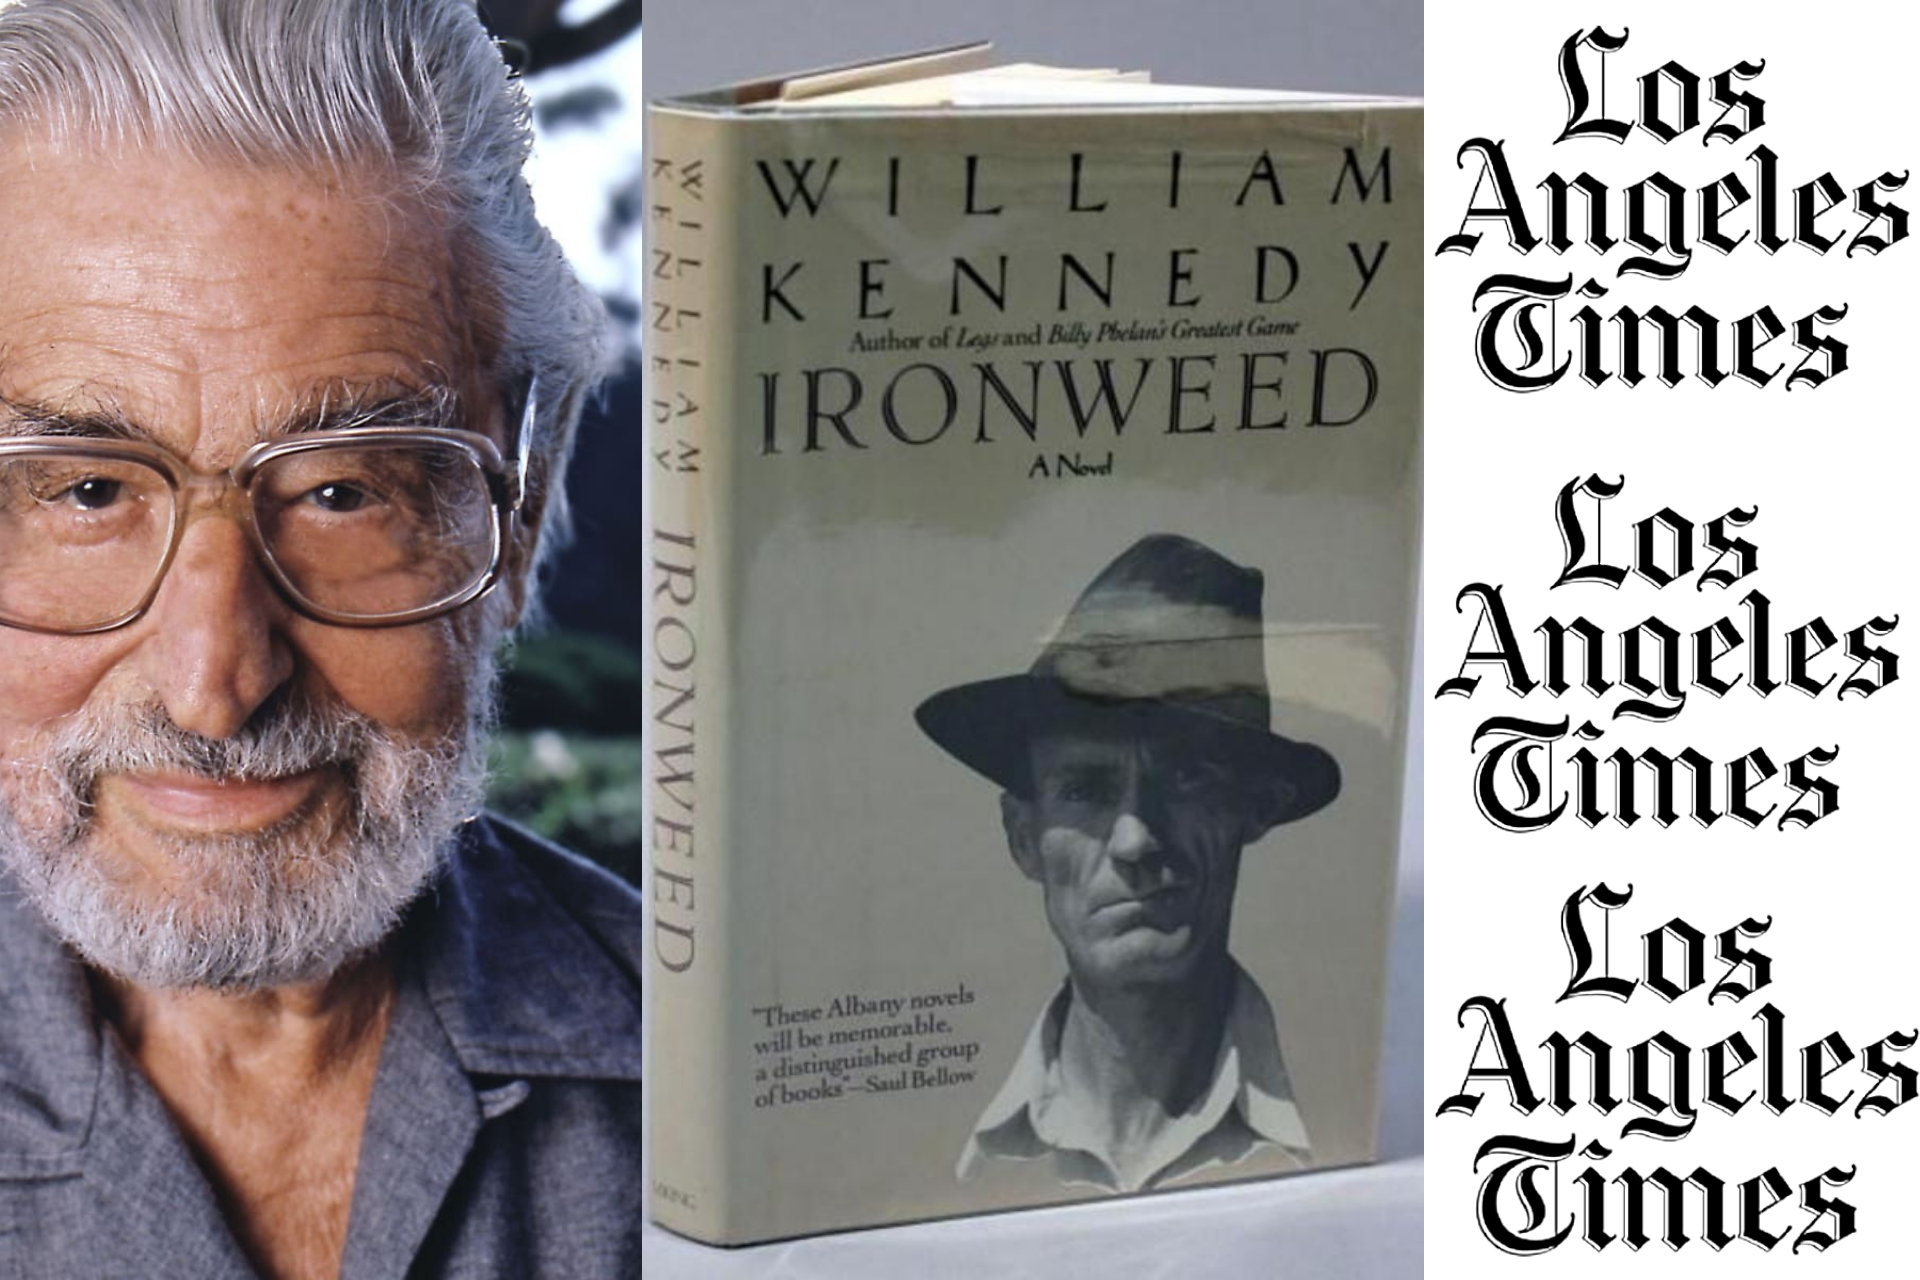 Winners of the Pulitzer Prize in 1984: Dr. Seuss, LA Times and Williams Kennedy "Ironweed"